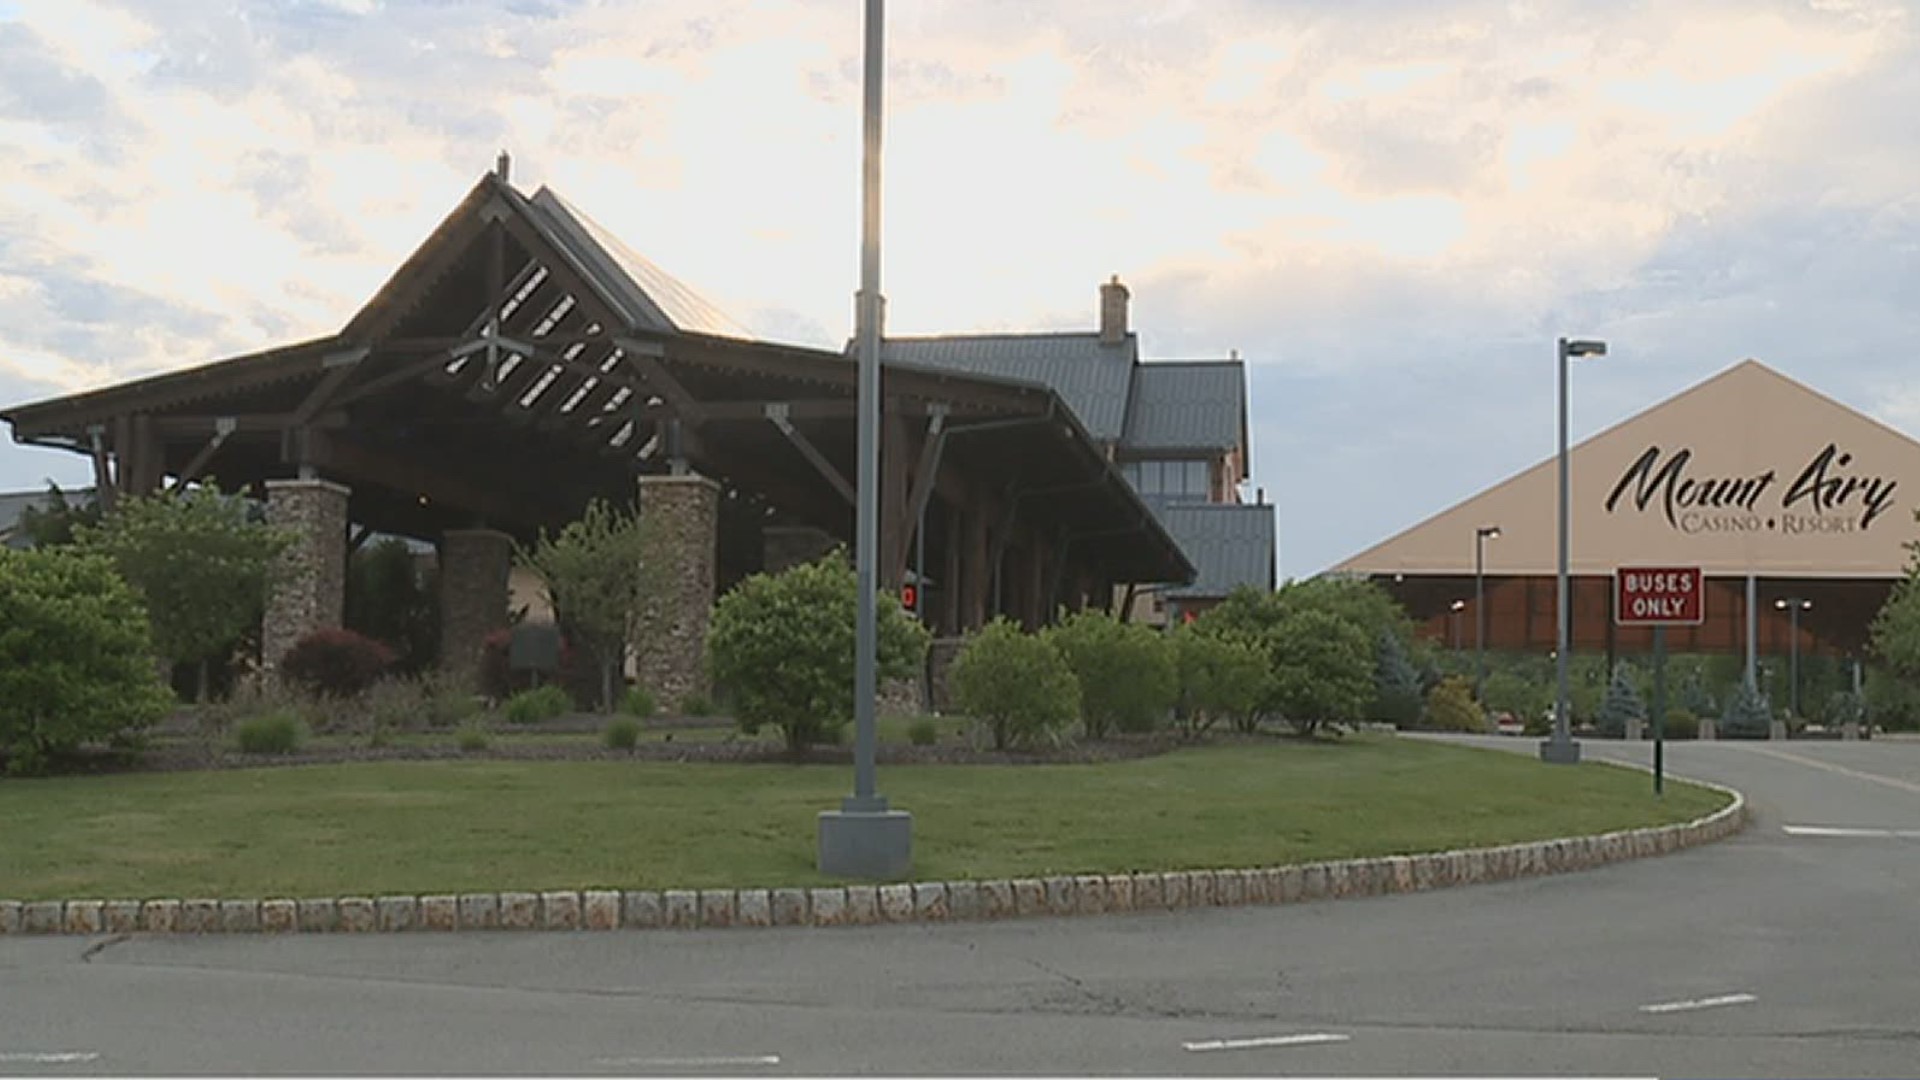 The casino says all guests and staff will be required to wear masks while on the property.